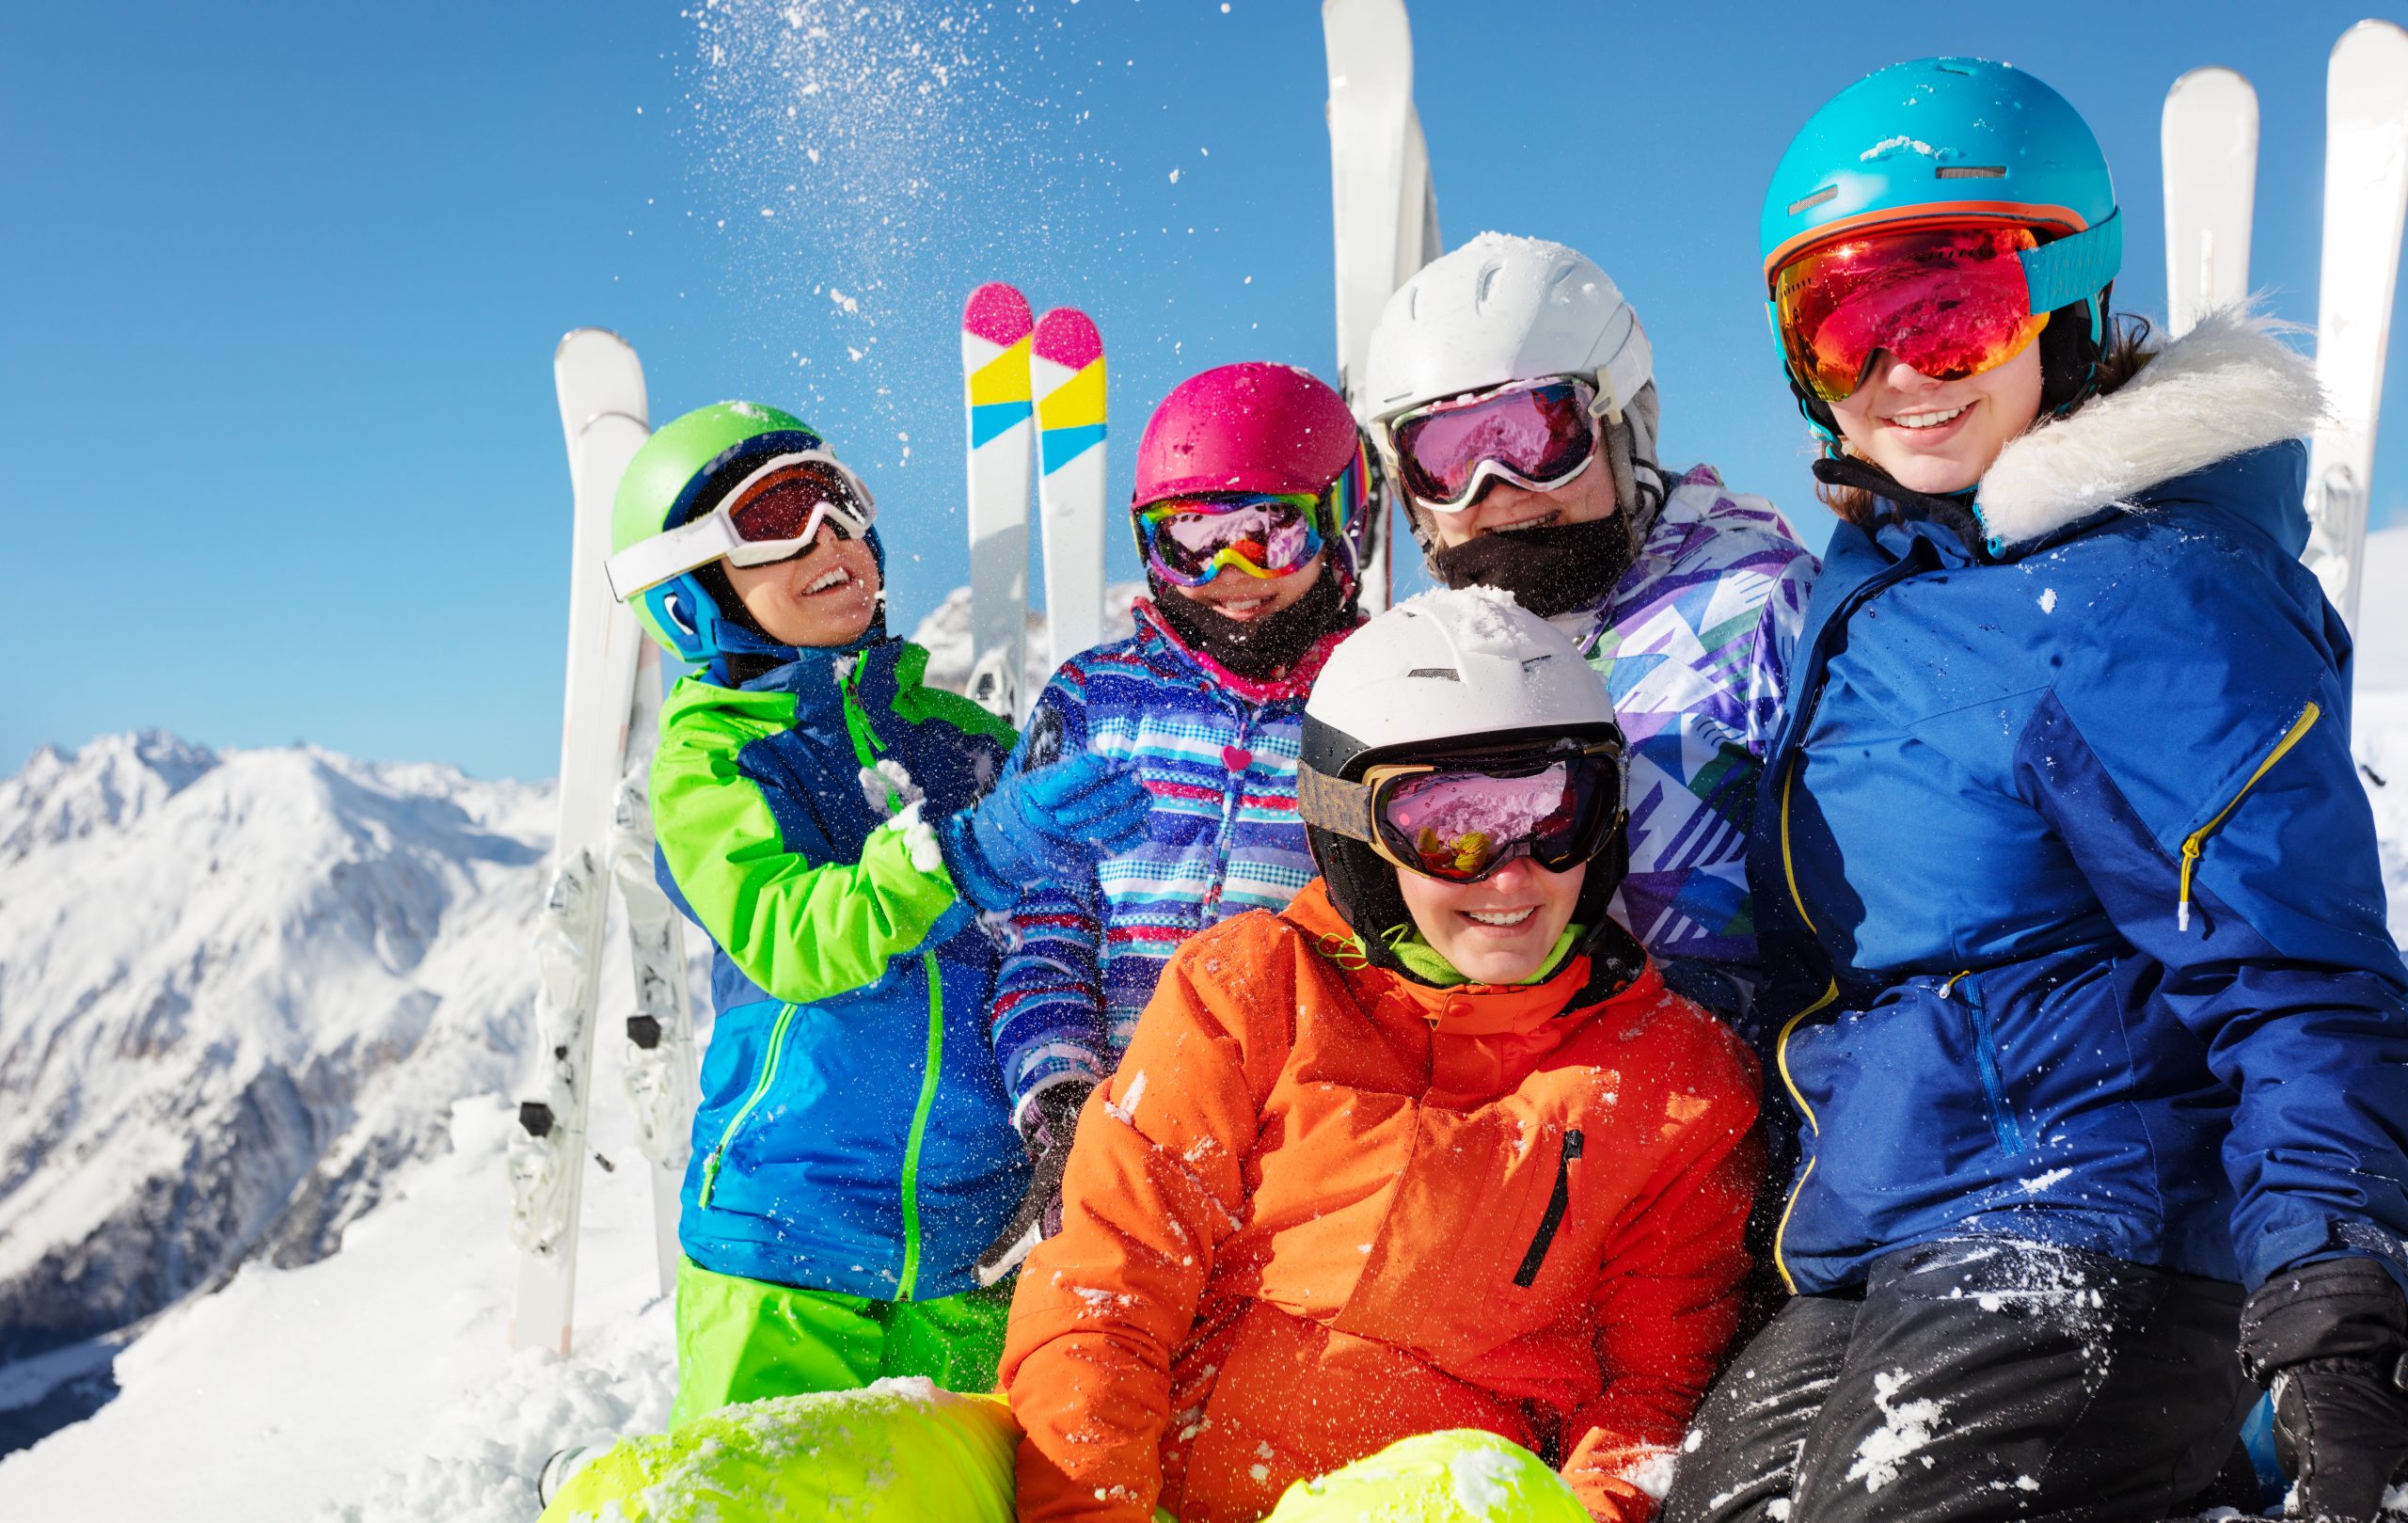 Group,Of,Ski,School,Children,Have,Fun,With,Snow,On